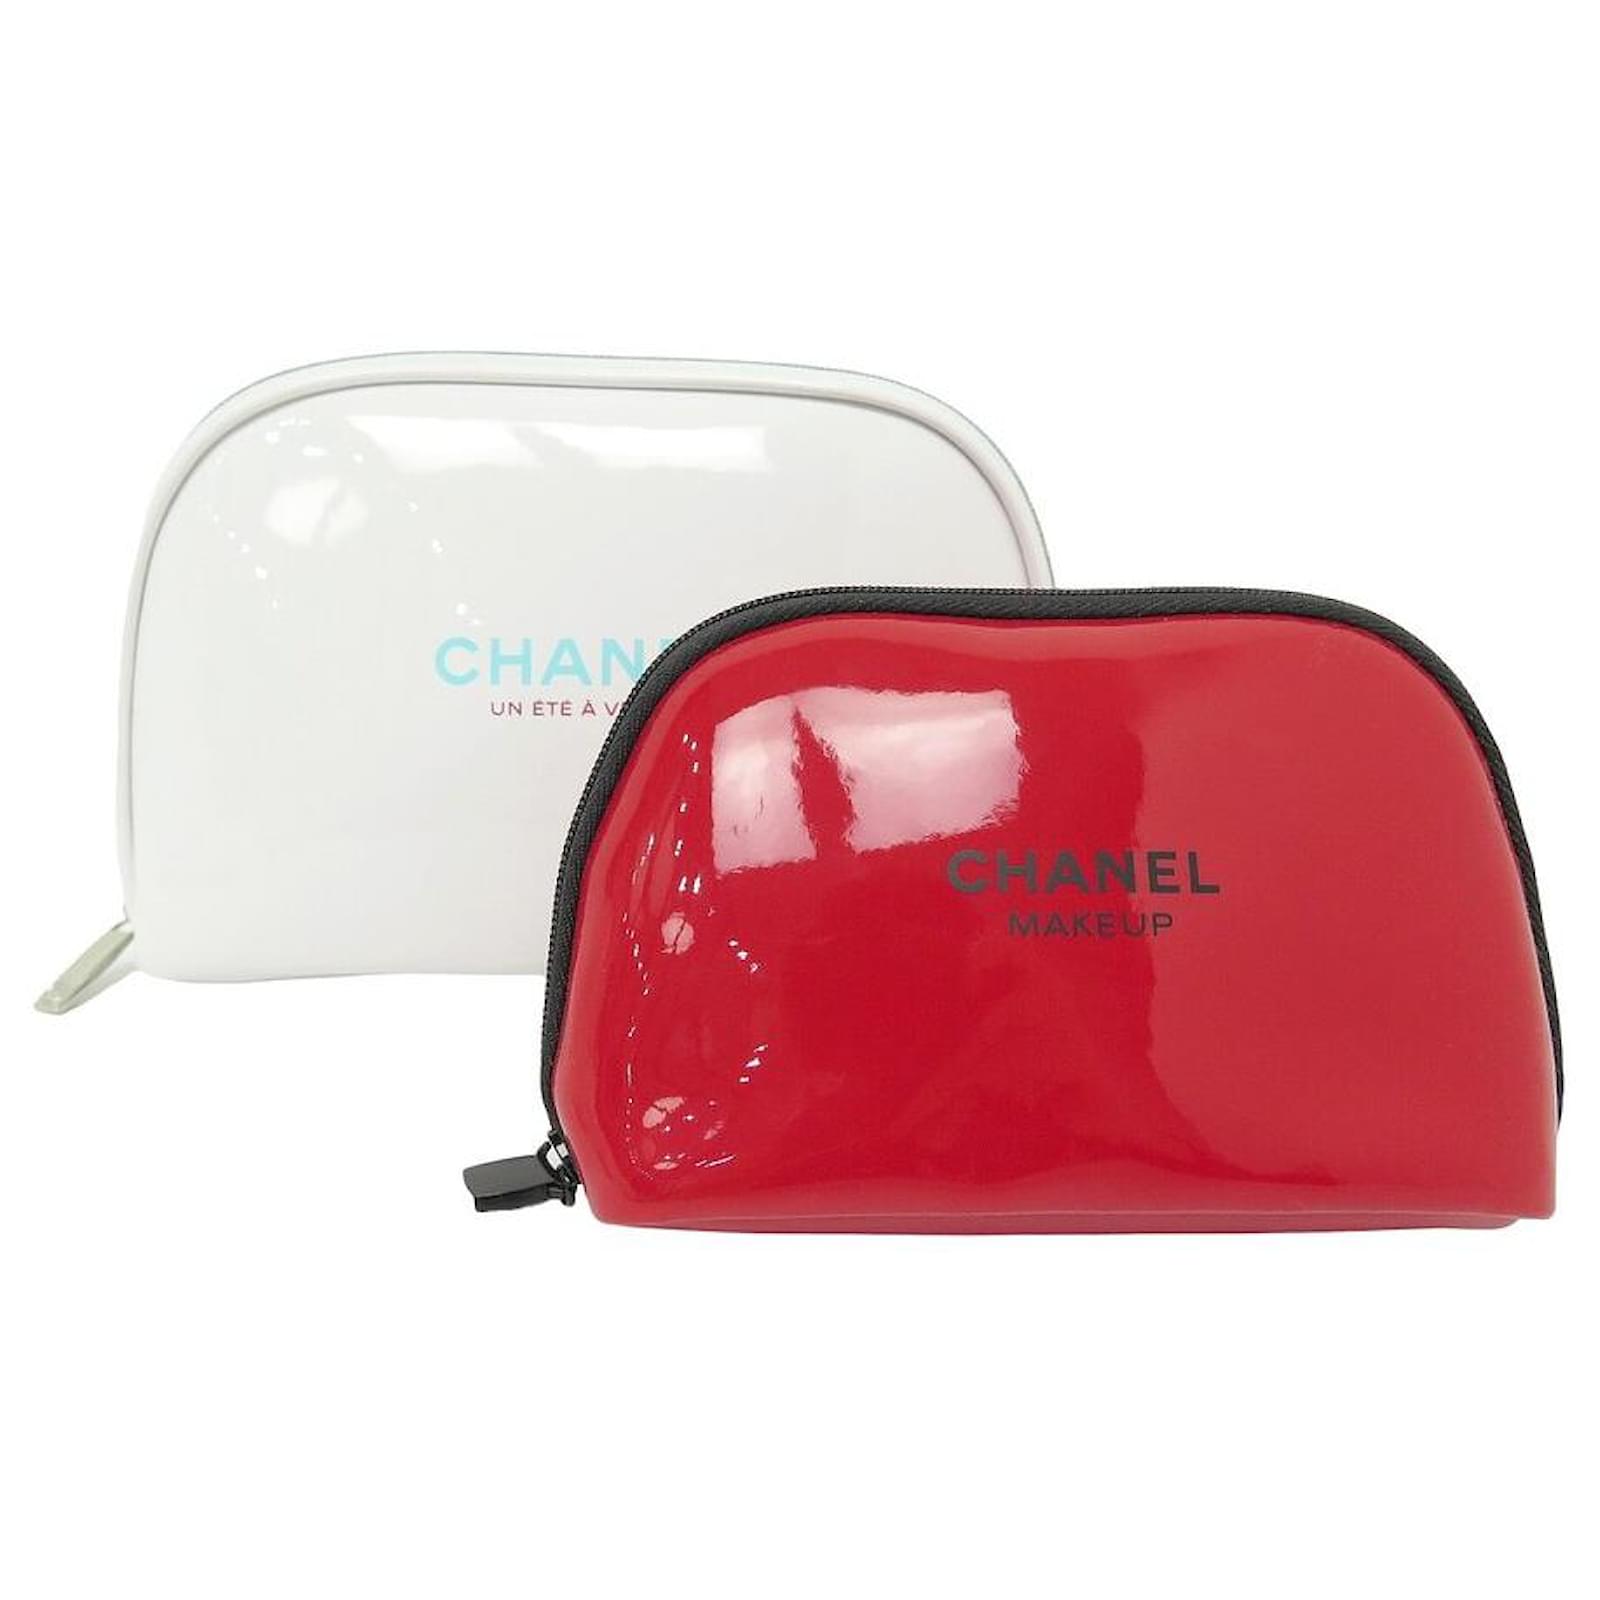 Clutch bags Chanel LOT 2 CHANEL KITS A SUMMER IN VENICE AND MAKE UP PATENT LEATHER RED White POUCH